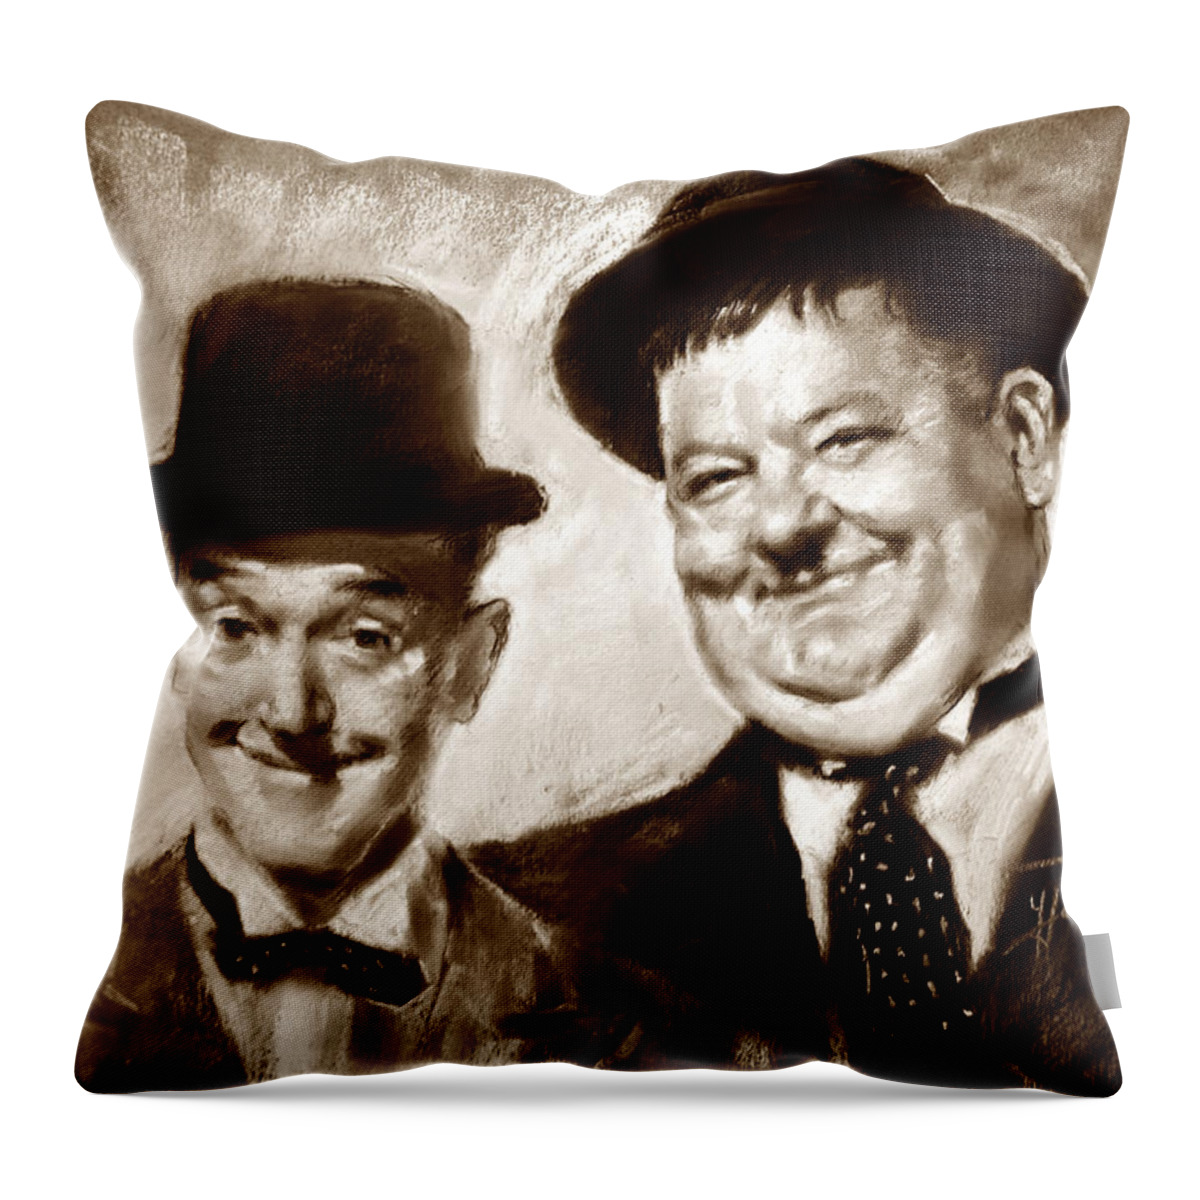 Stan Laurel Throw Pillow featuring the drawing Stan Laurel Oliver Hardy by Ylli Haruni